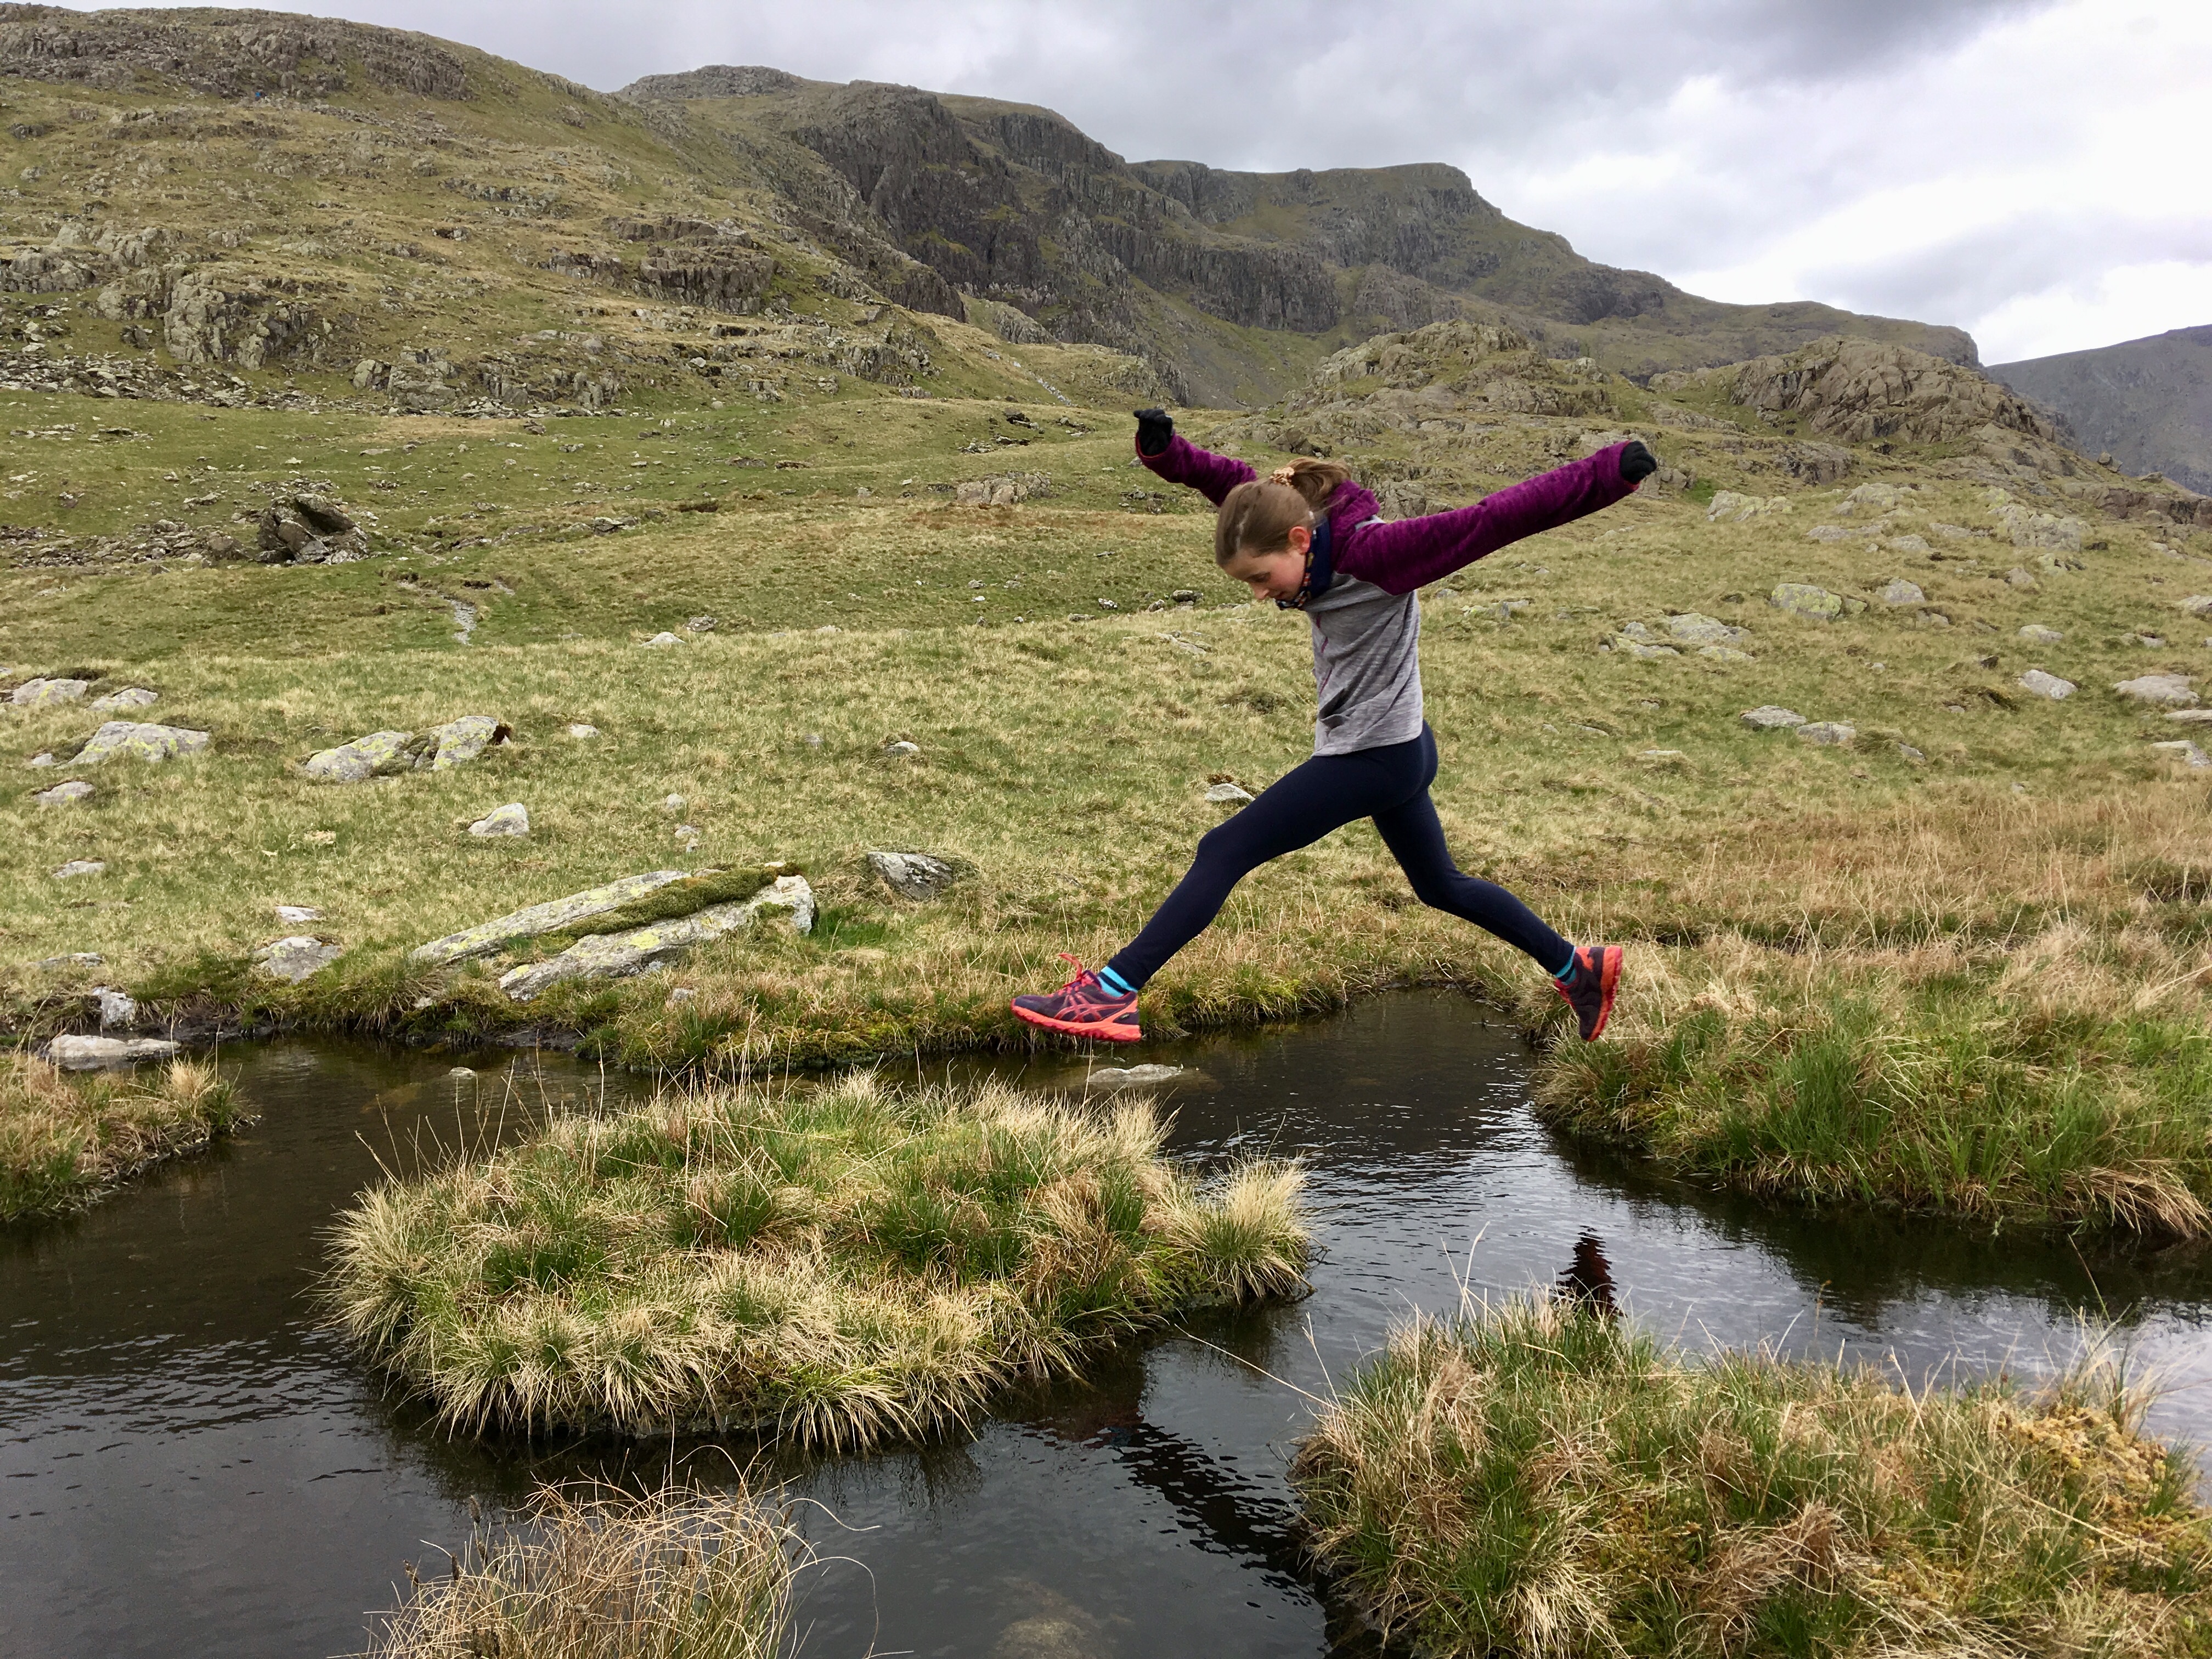 Building confidence: big leaps and baby steps - Claire Antrobus